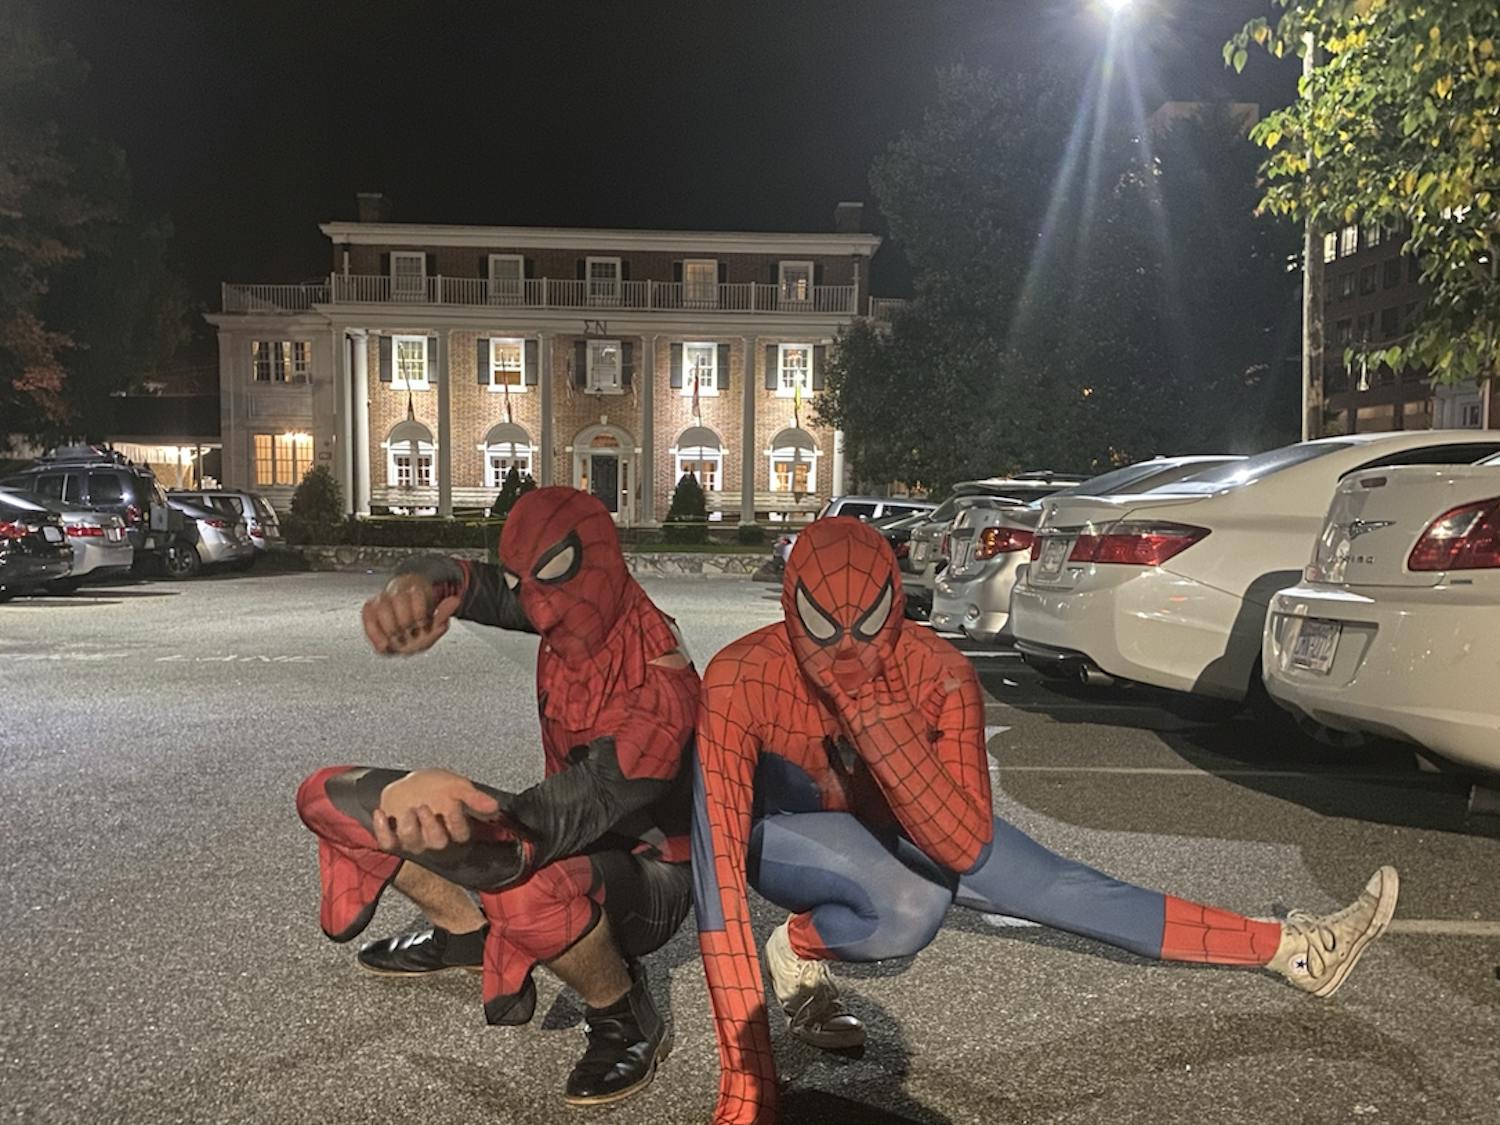 Two of the "Peter Parkers" involved in Tuesday night's Spider-Men event pose pretending to shoot webs out of their arms, as they did in campus libraries. 